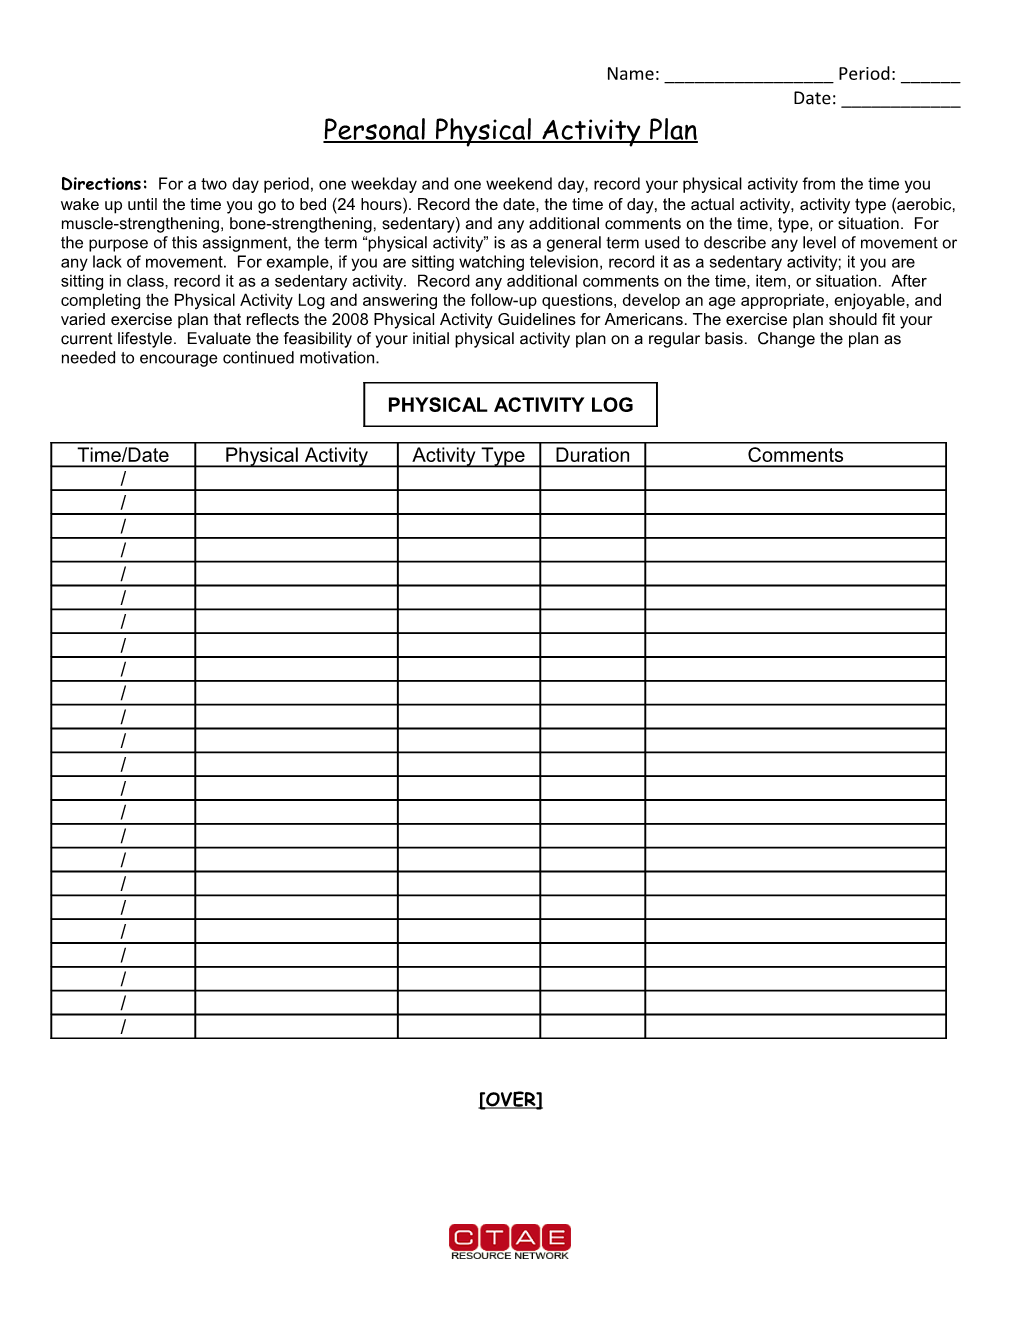 Physical Activity Log Follow-Up Questions